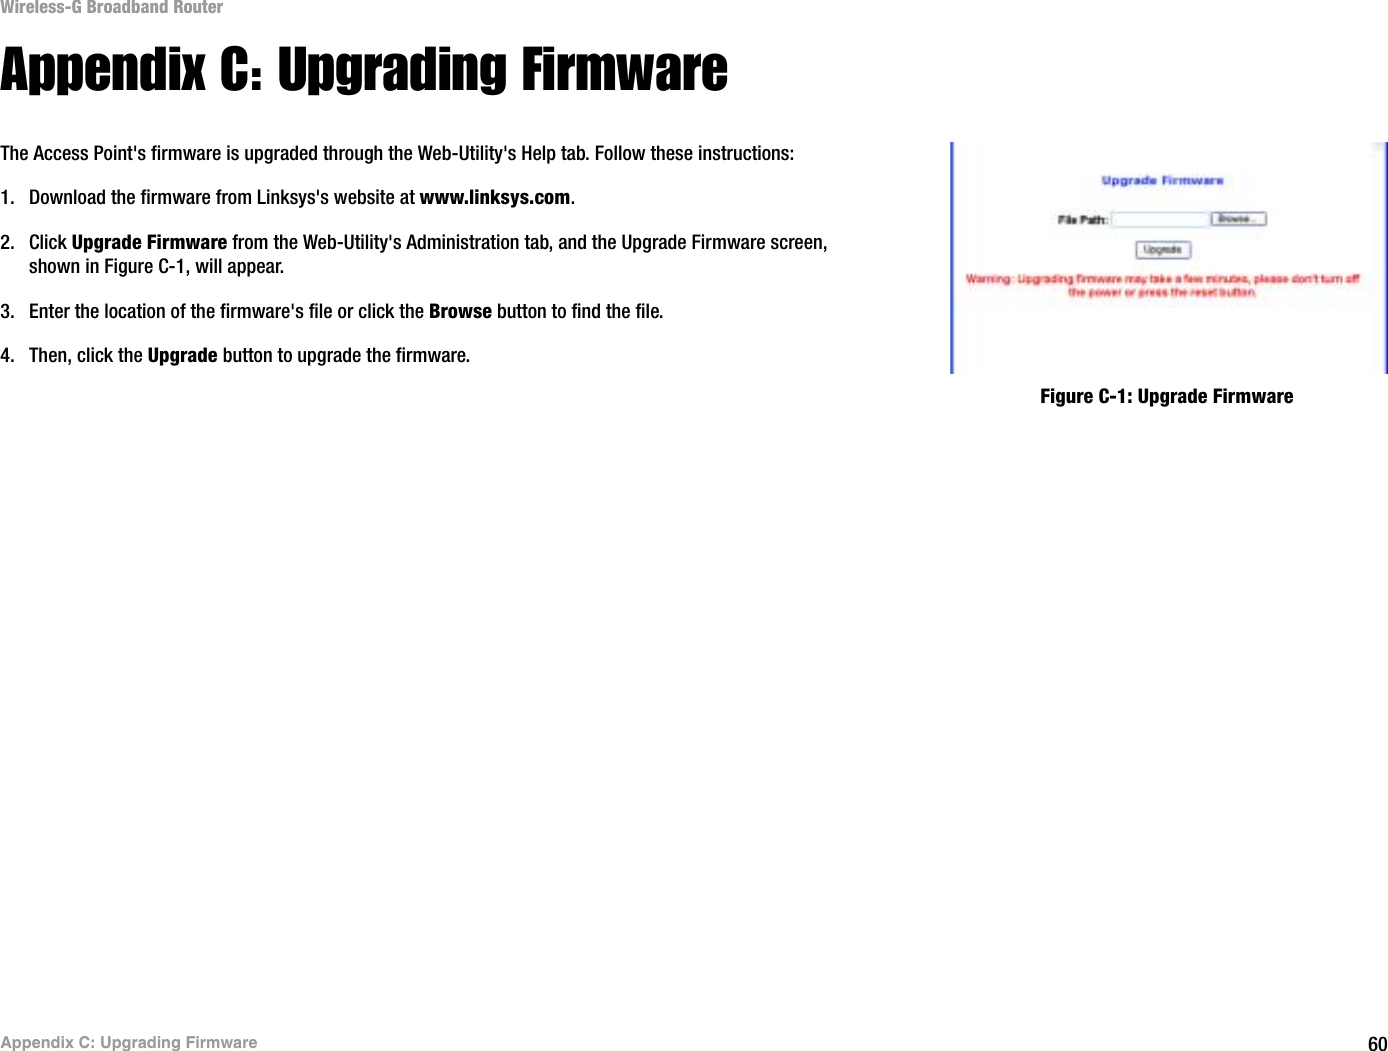 60Appendix C: Upgrading FirmwareWireless-G Broadband RouterAppendix C: Upgrading FirmwareThe Access Point&apos;s firmware is upgraded through the Web-Utility&apos;s Help tab. Follow these instructions:1. Download the firmware from Linksys&apos;s website at www.linksys.com.2. Click Upgrade Firmware from the Web-Utility&apos;s Administration tab, and the Upgrade Firmware screen, shown in Figure C-1, will appear.3. Enter the location of the firmware&apos;s file or click the Browse button to find the file. 4. Then, click the Upgrade button to upgrade the firmware.Figure C-1: Upgrade Firmware